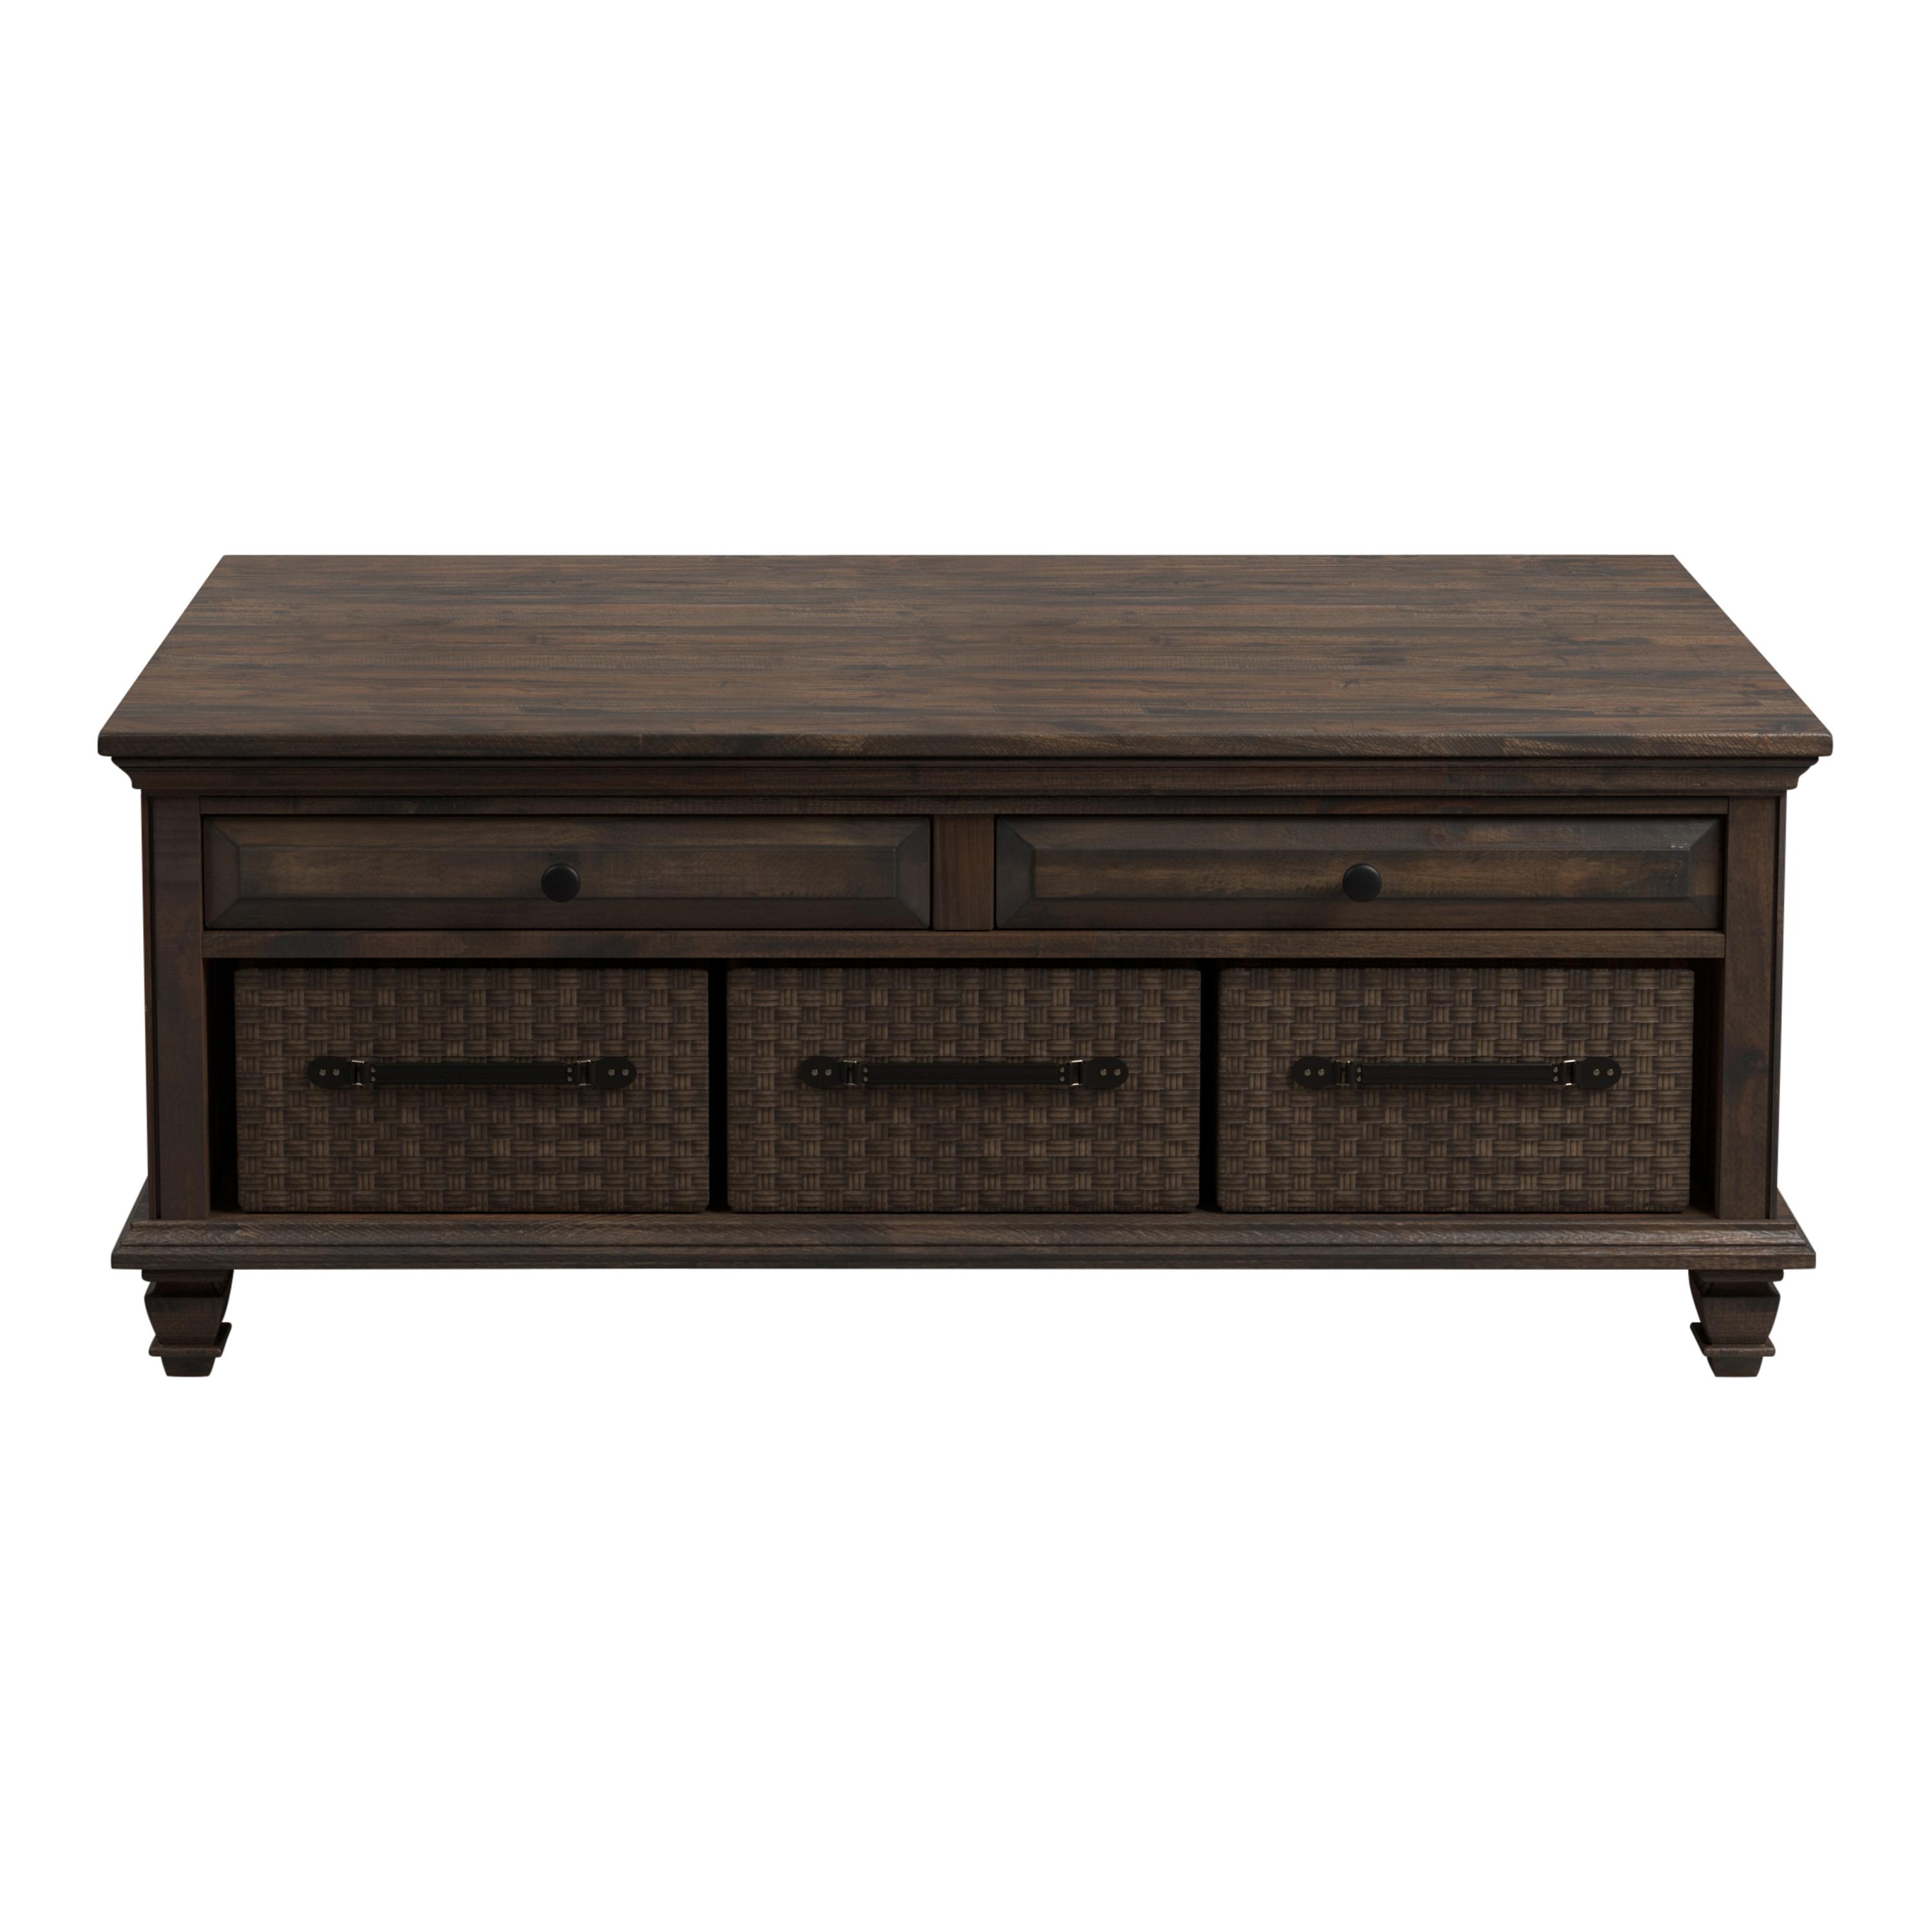 Traditional Coffee Table 724058 724058 in Brown 